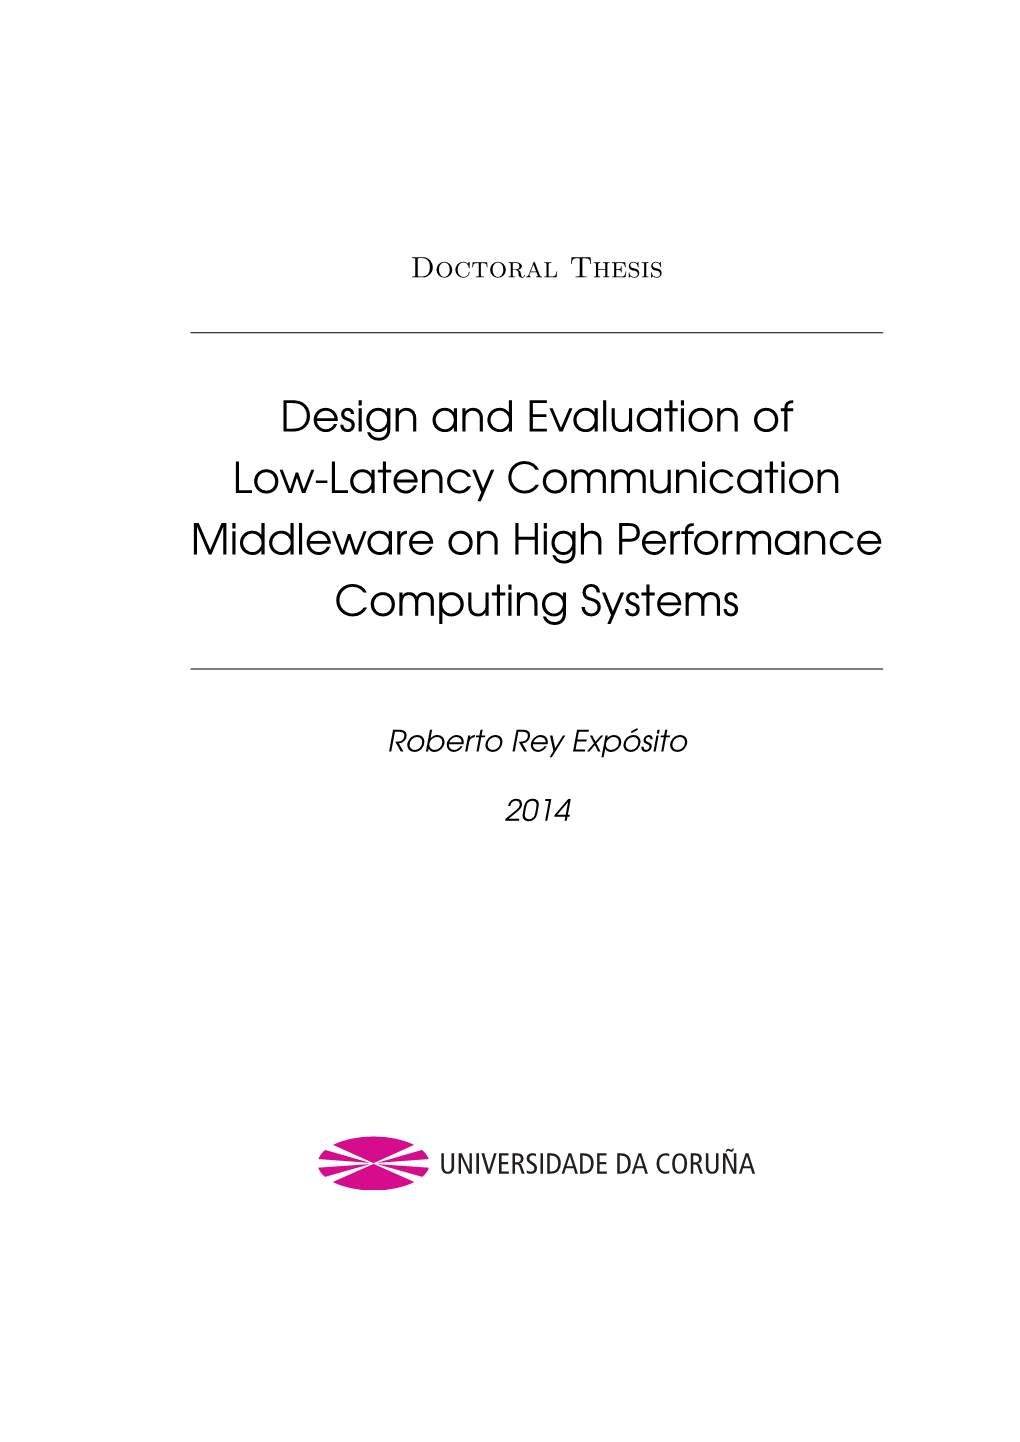 Design and Evaluation of Low-Latency Communication Middleware on High Performance Computing Systems